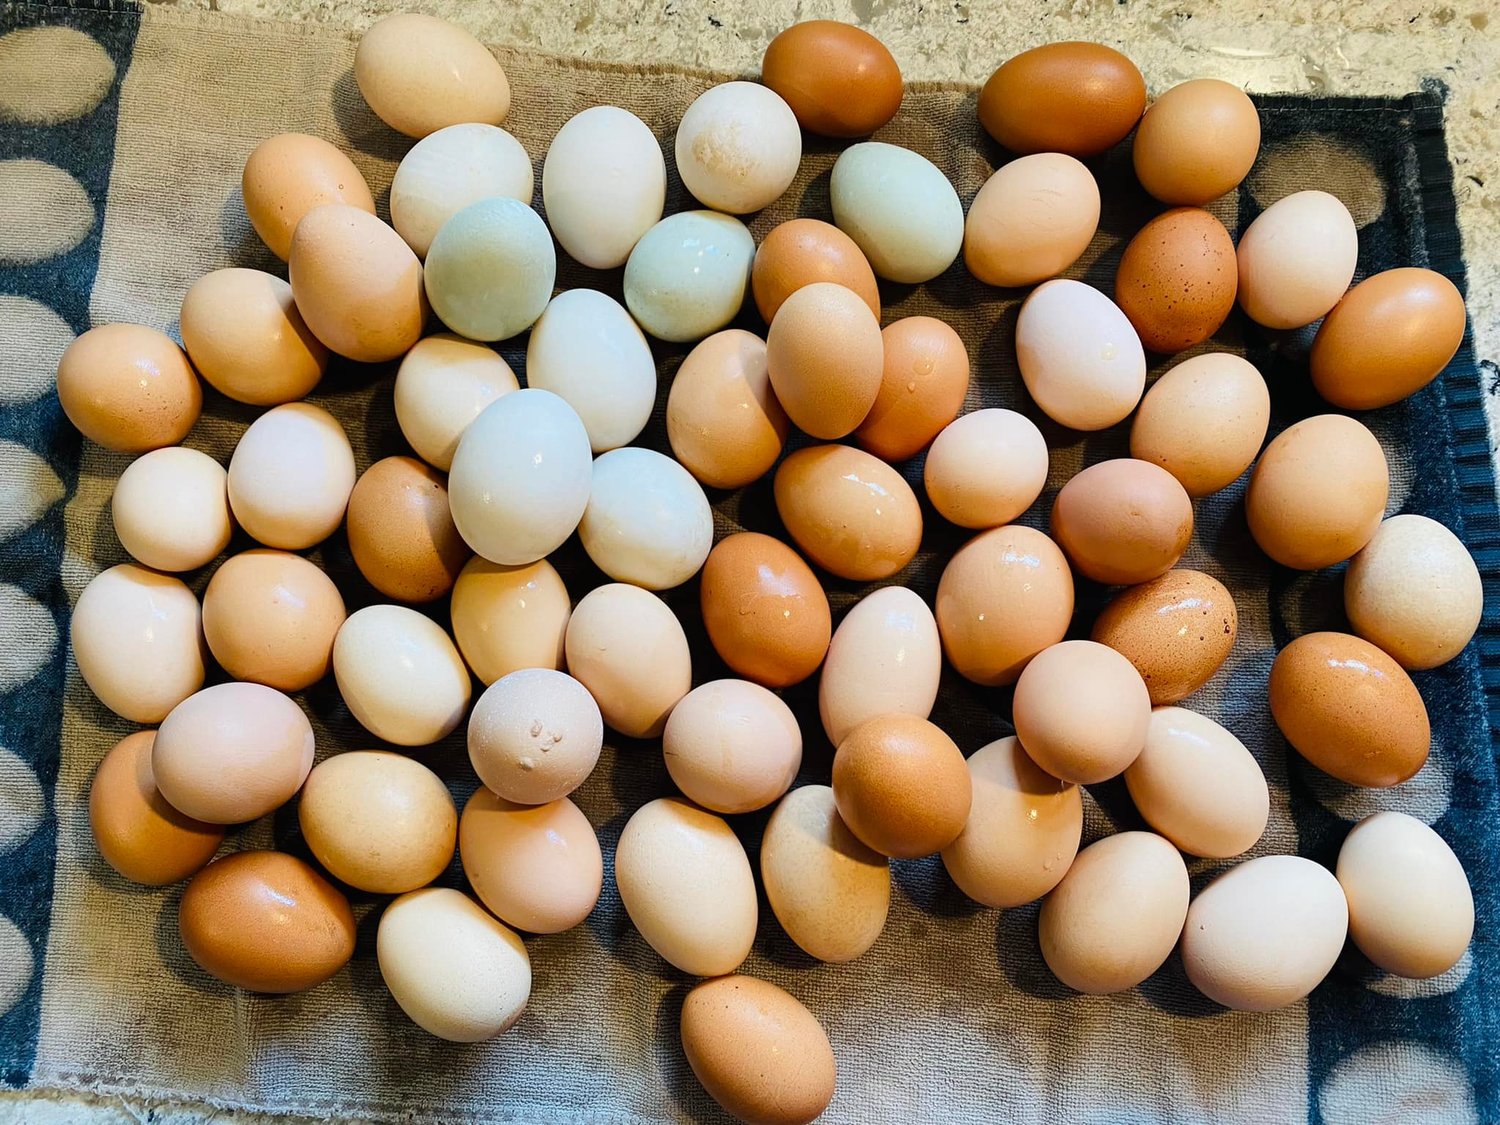 Noah’s Farm Fresh Eggs come from chickens on his family farm.